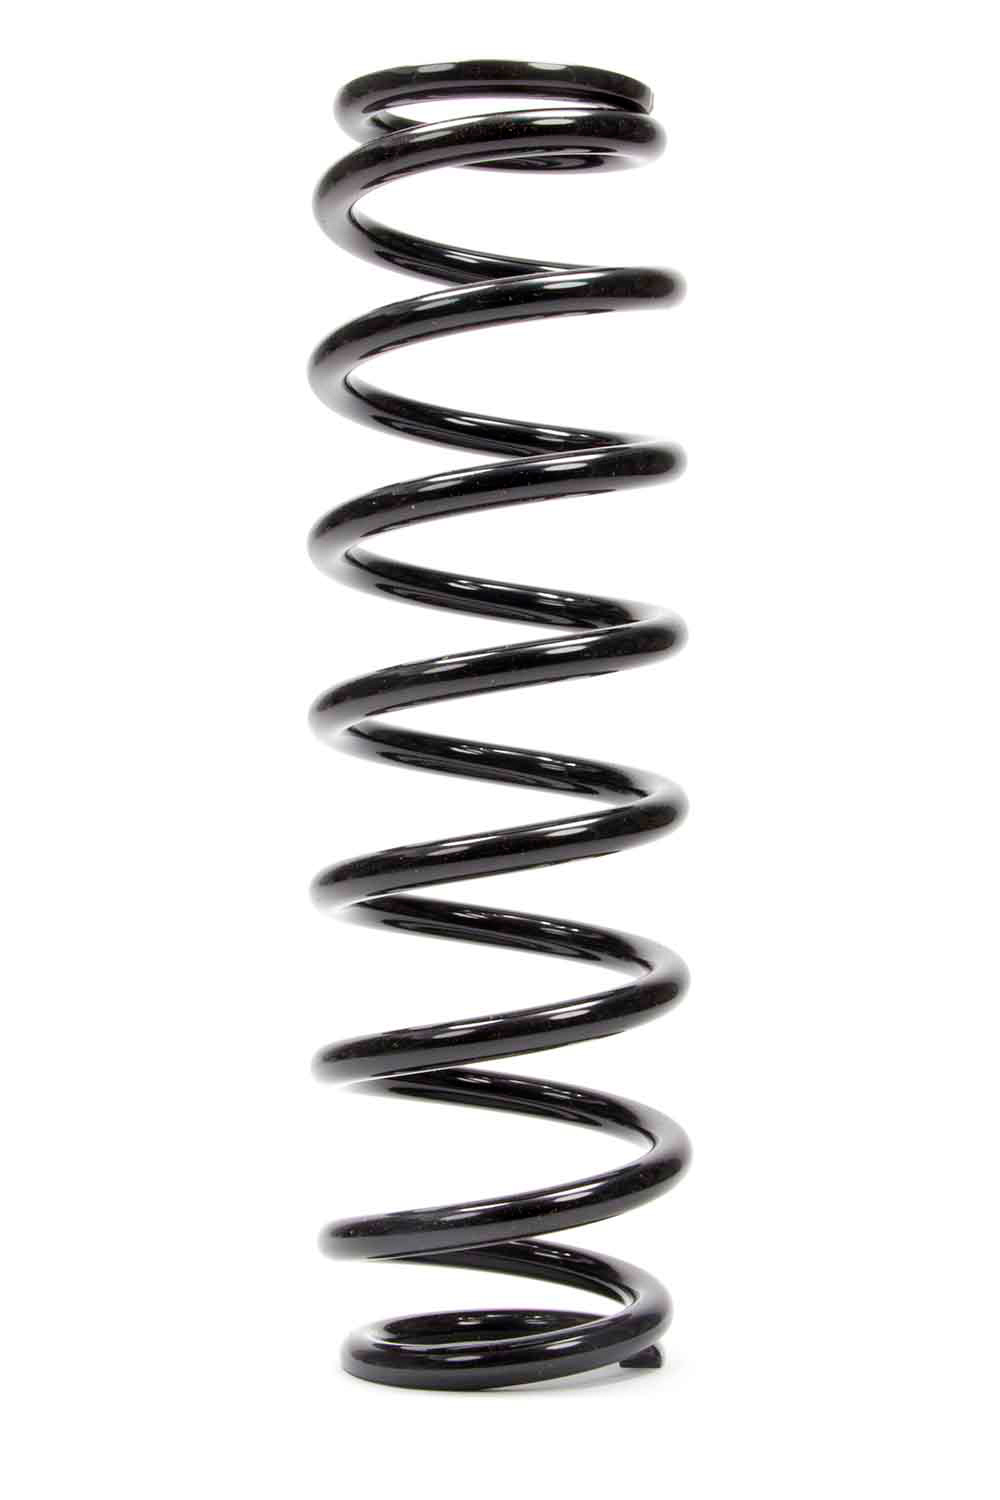 Integra Shocks 310-2514-250DLC Coil Spring, DLC Series, Coil-Over, 2.625 in ID, 14.000 in Length, 250 lb/in Spring Rate, Steel, Black Powder Coat, Each